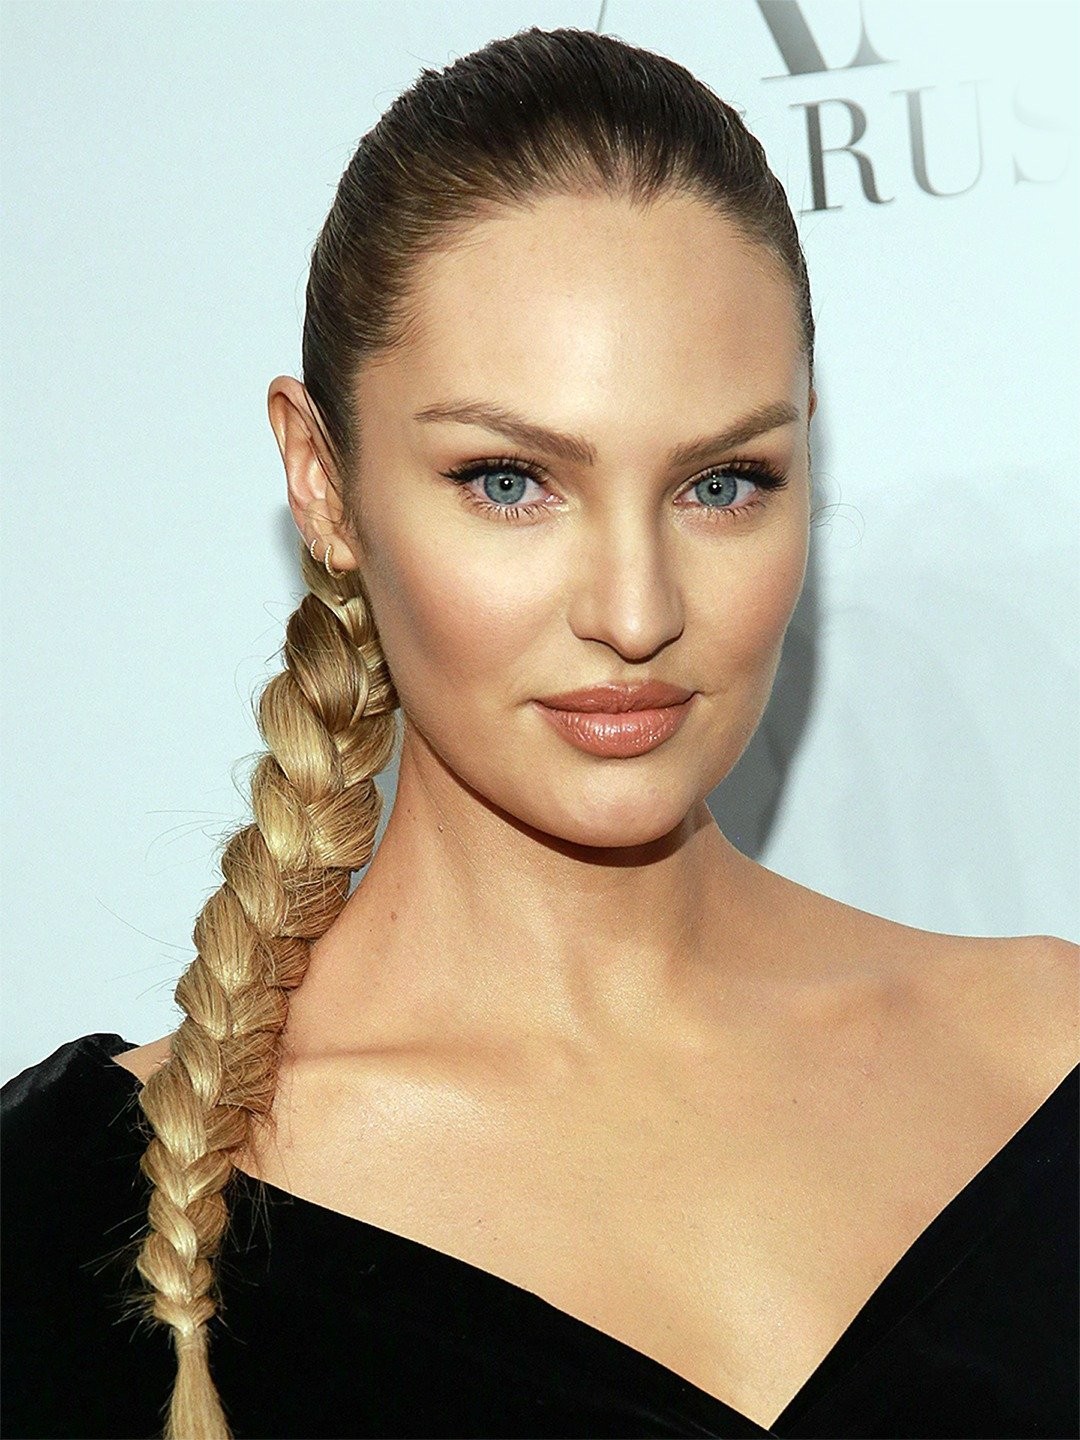 Five Minutes with Candice Swanepoel